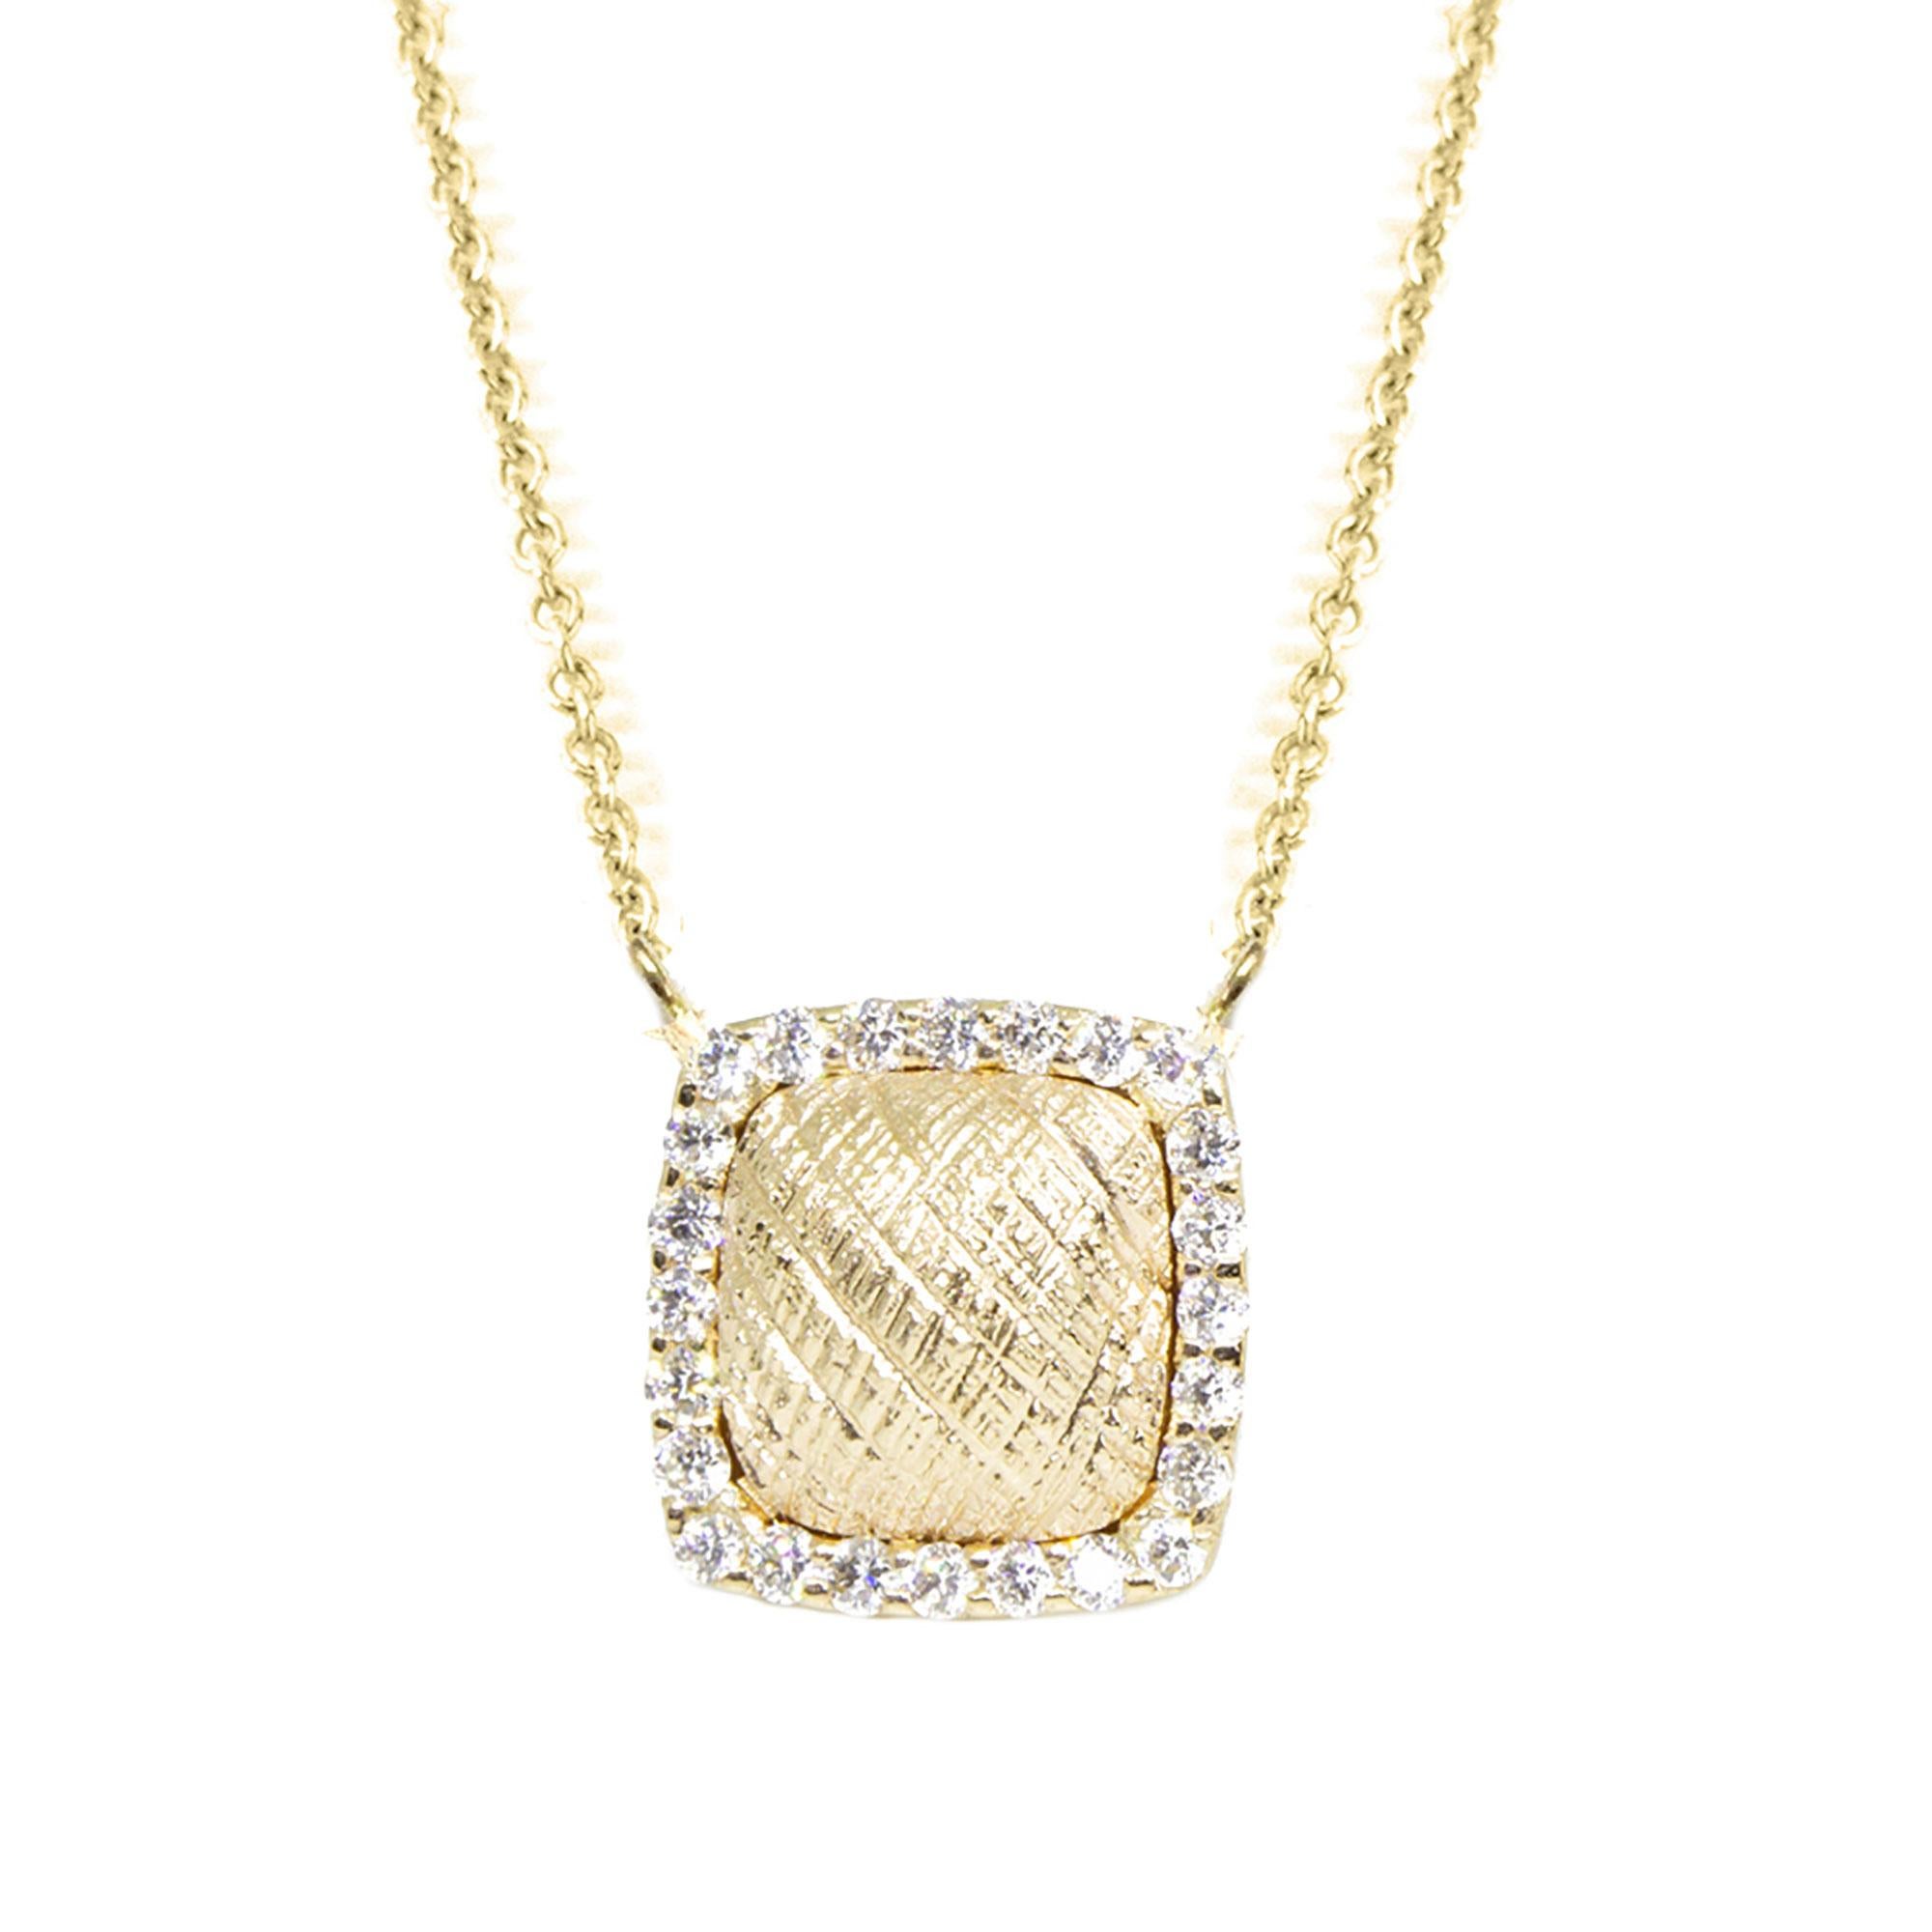 Uplift your look: The Spirit Lace Pave Gold Necklace features a square-shaped pendant detailed with a hand-hammered crosshatch pattern framed in a halo of diamonds.

Details
Metal: 18K Yellow Gold
Diamond carat: 0.15
Length: 15-17''
Diamond size: 1mm